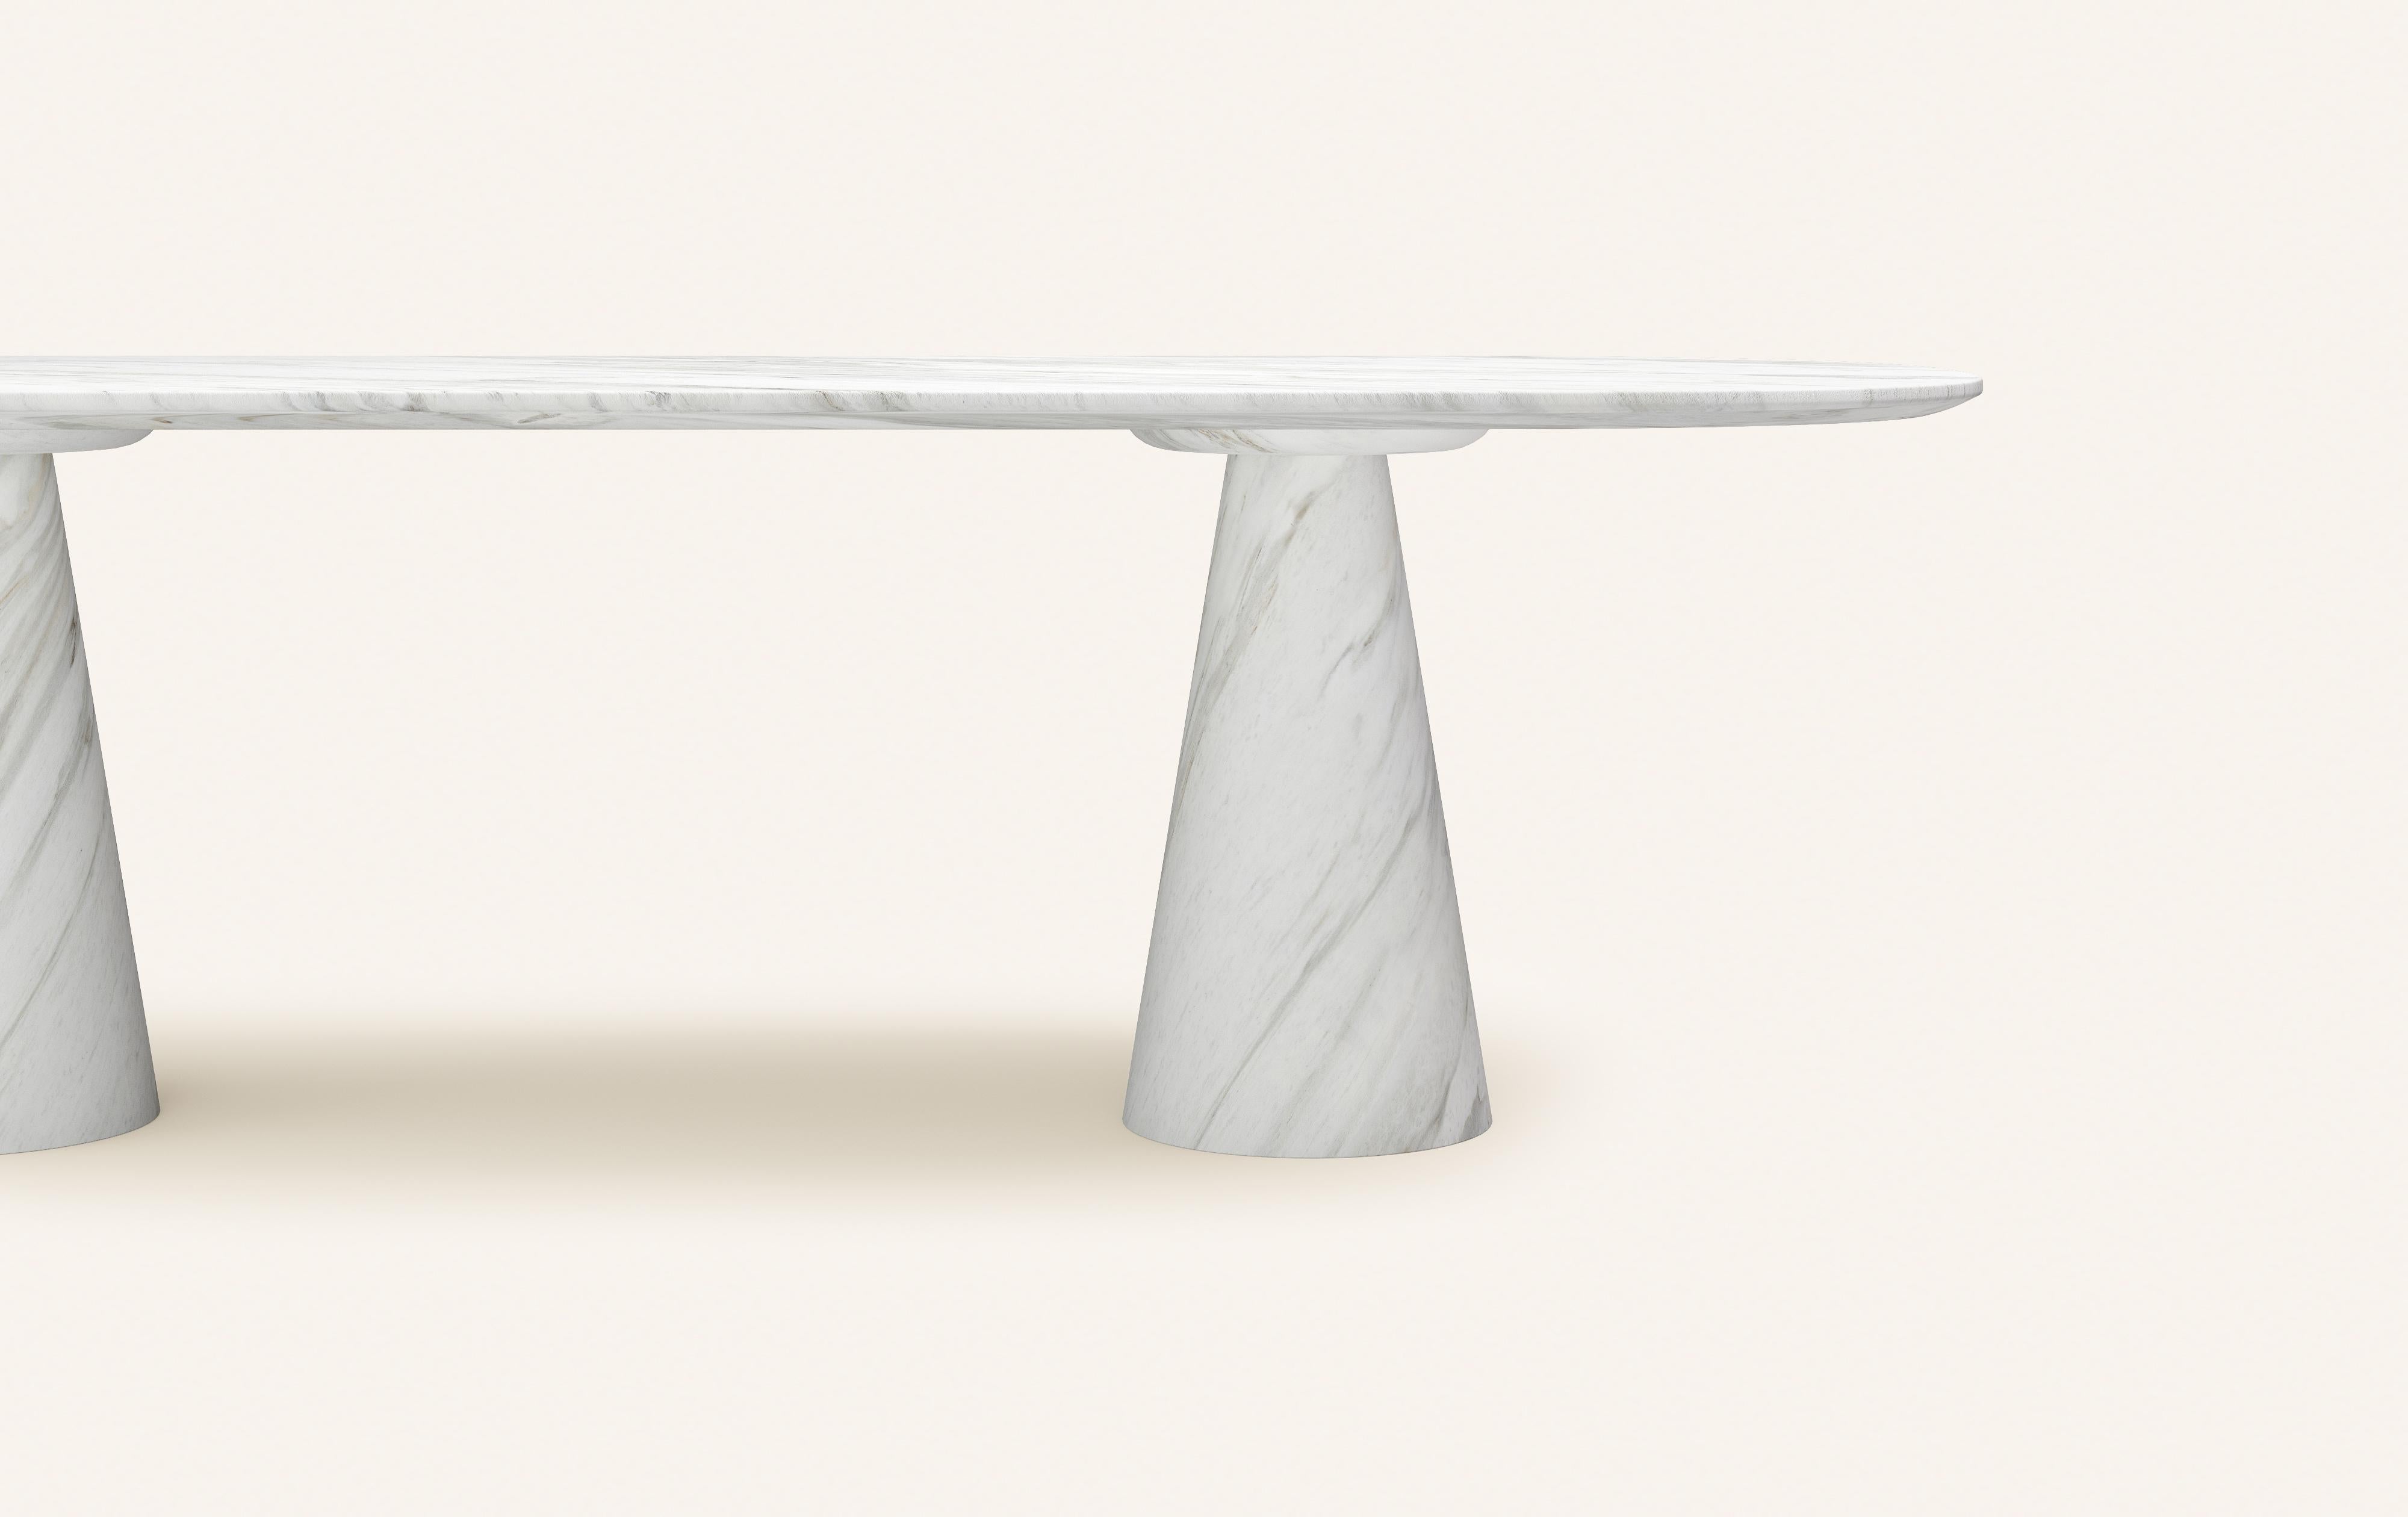 American FORM(LA) Cono Oval Dining Table 84”L x 42”W x 30”H Volakas White Marble For Sale